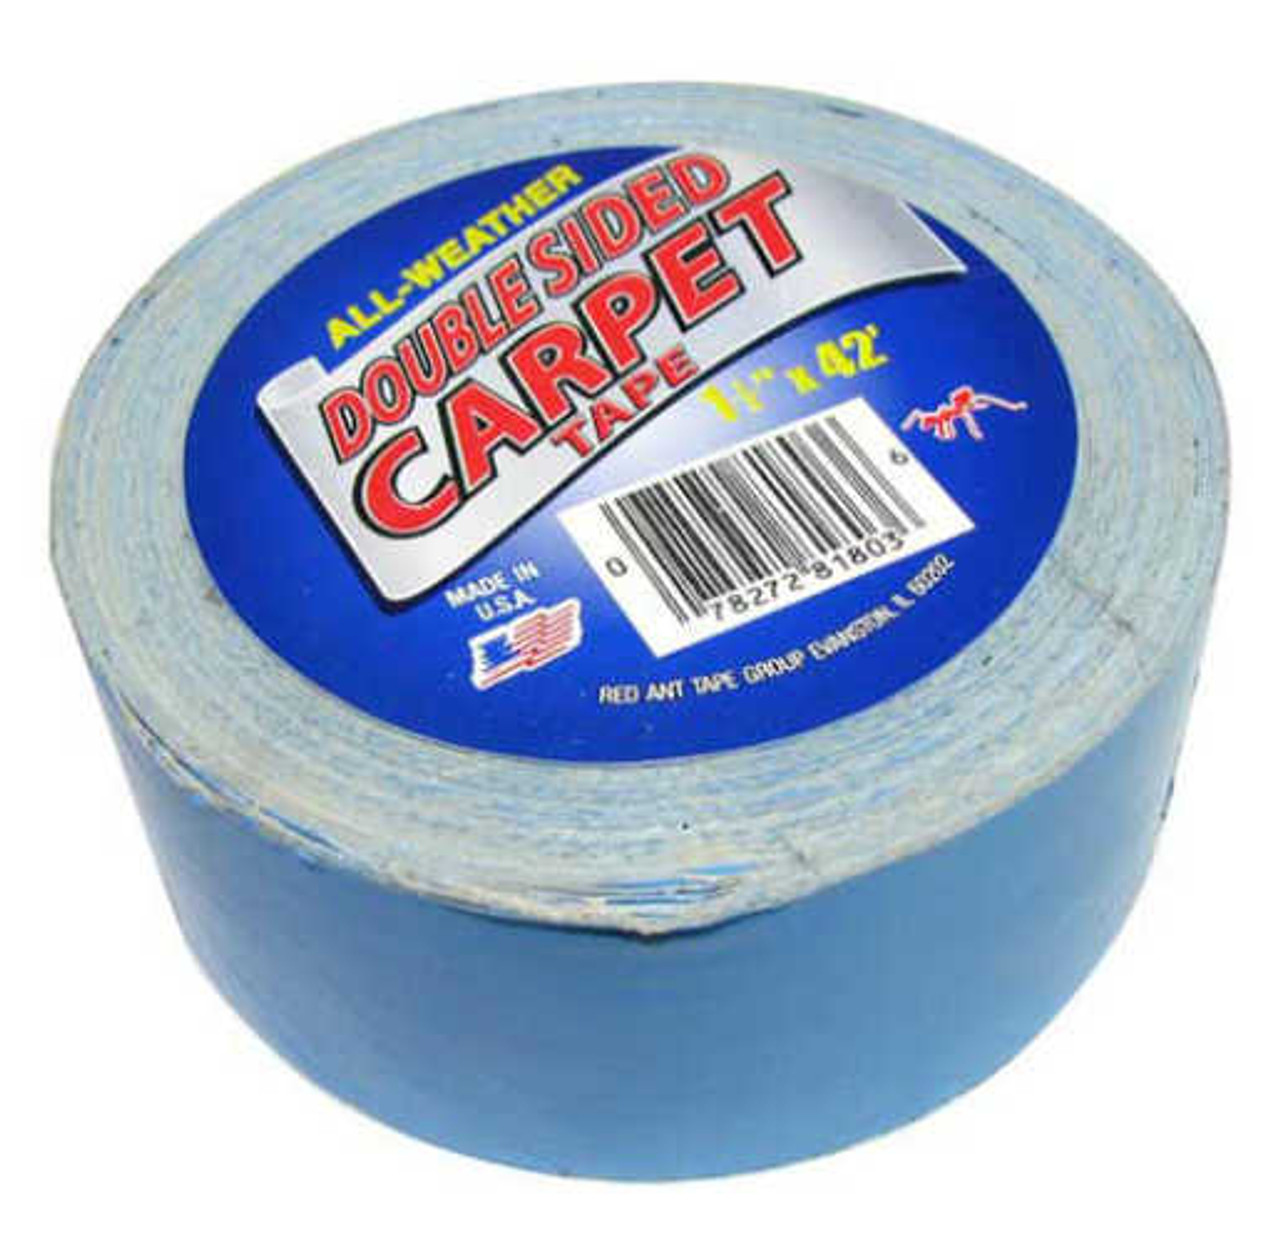 25 YARDS X 1.5 DOUBLE-SIDED CARPET TAPE